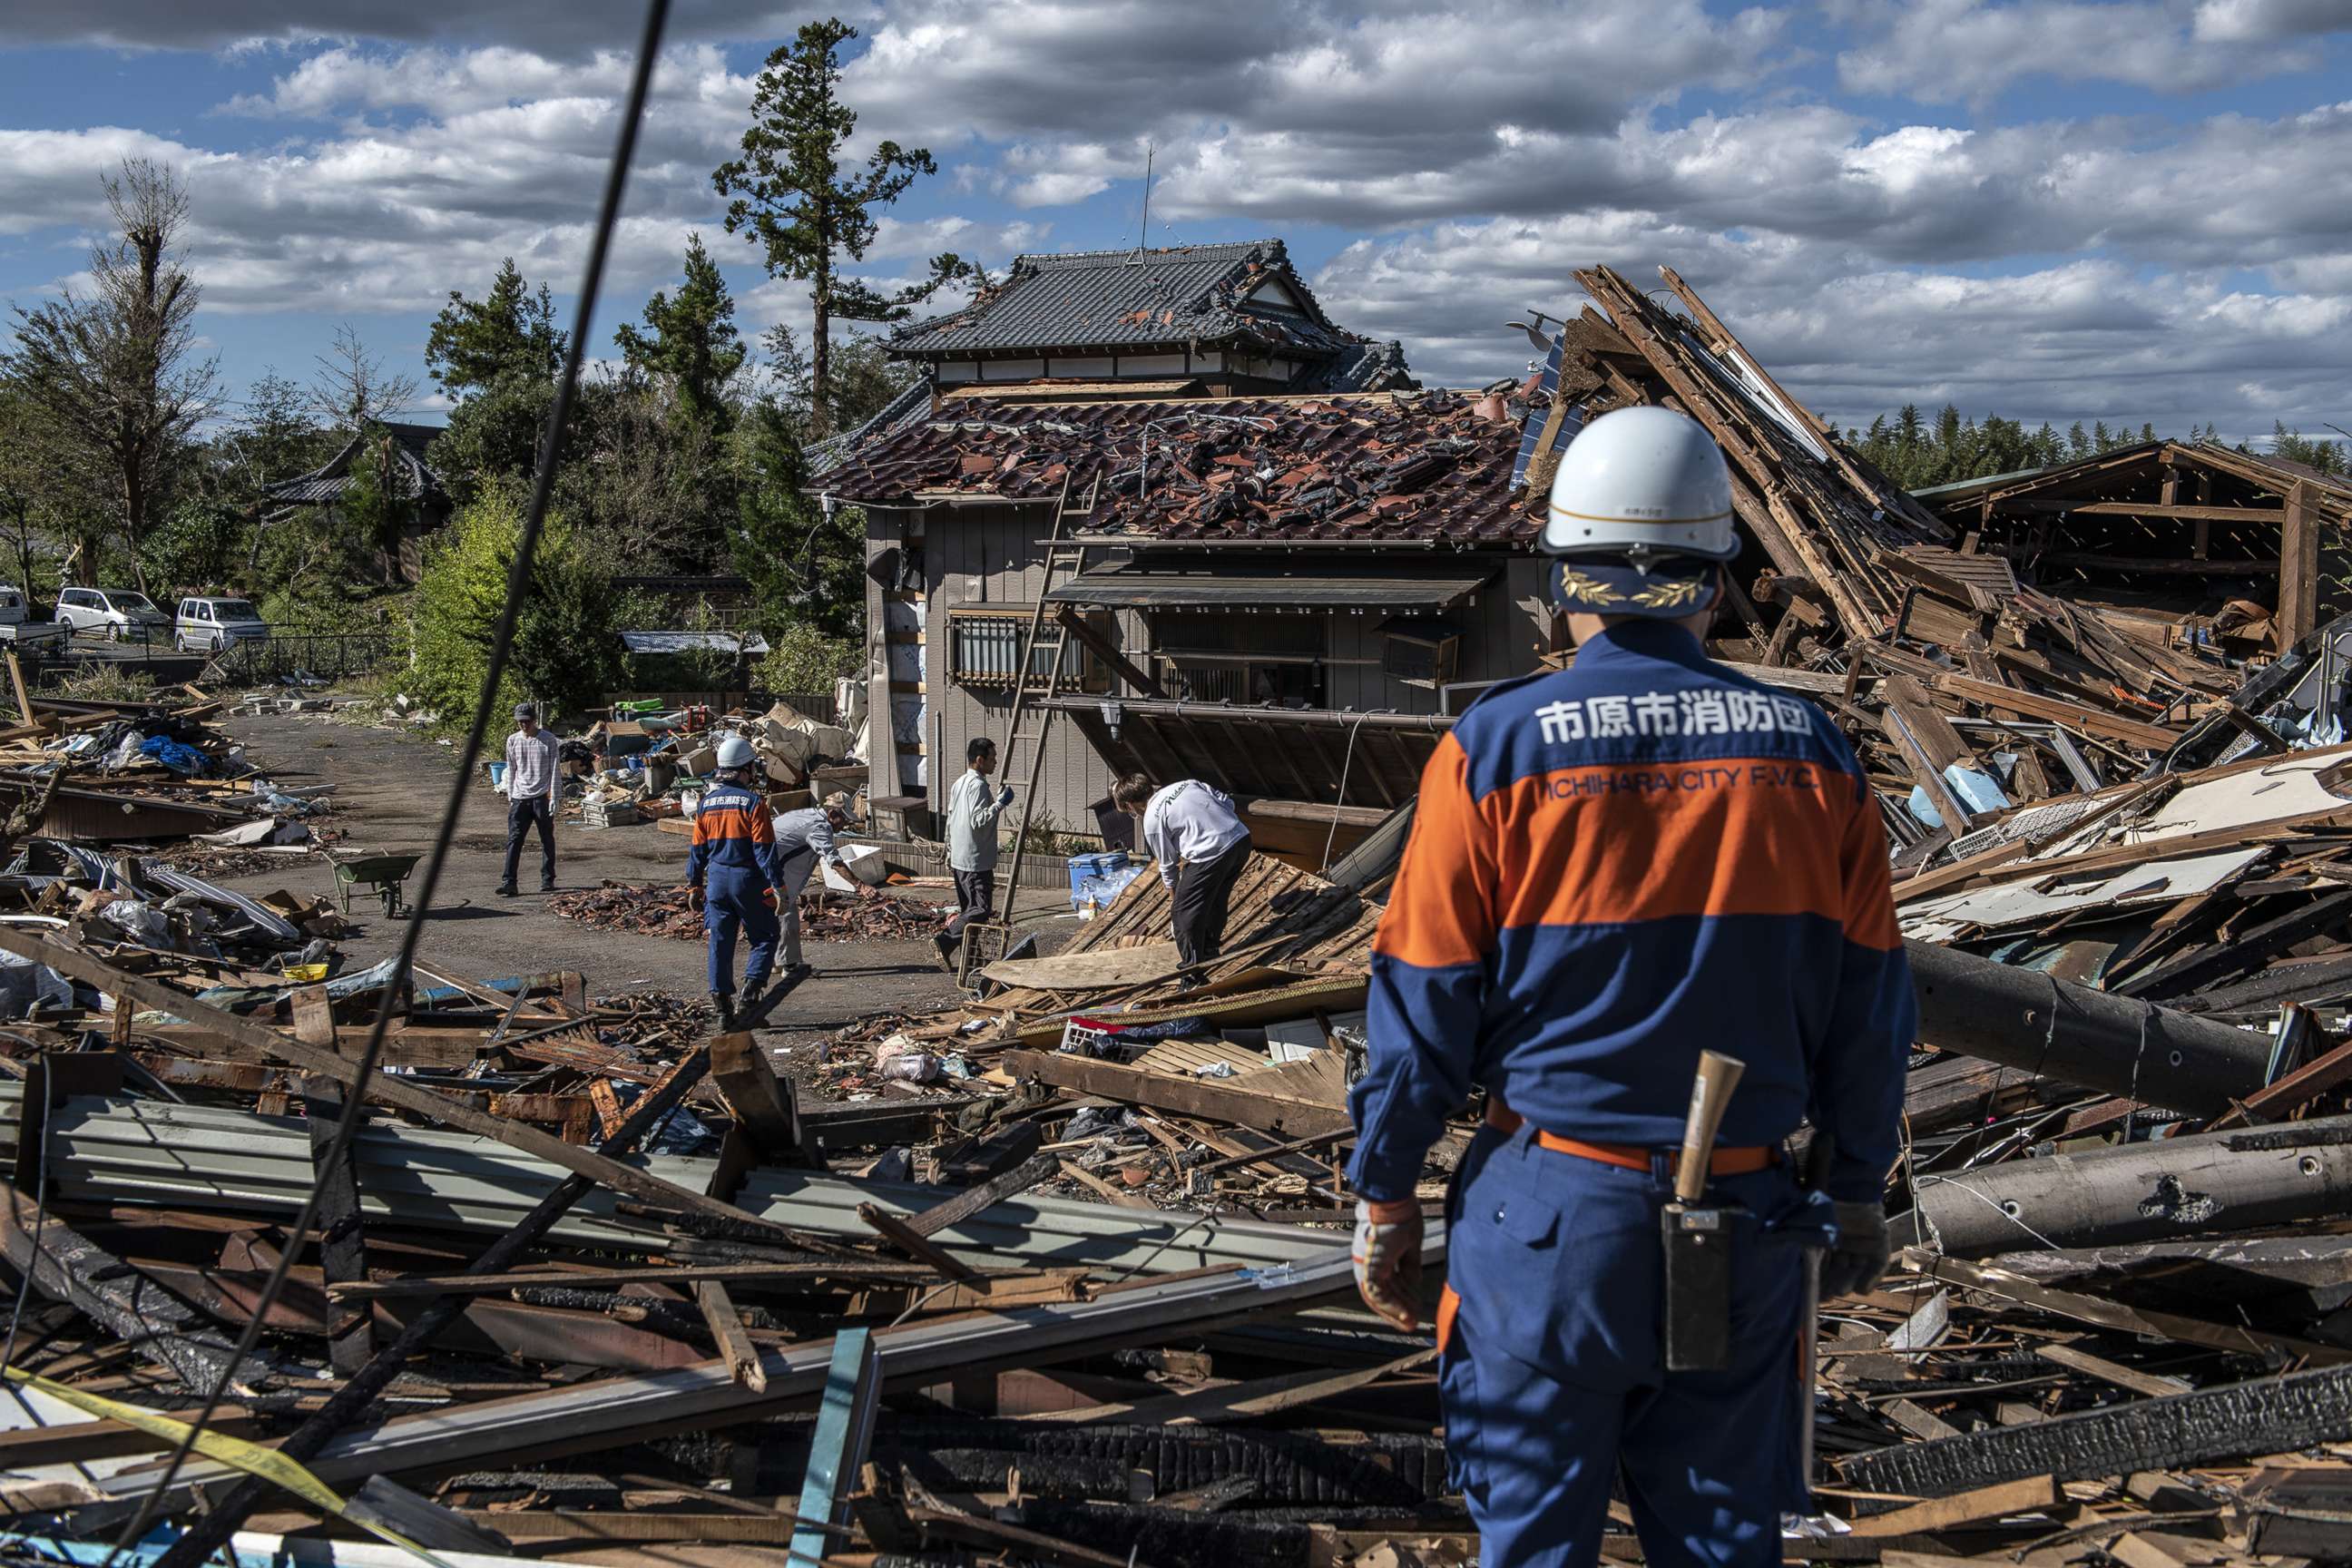 PHOTO: Search and rescue crews sort through the debris of a building destroyed by a tornado shortly before the arrival of Typhoon Hagibis, Oct. 13, 2019, in Chiba, Japan.